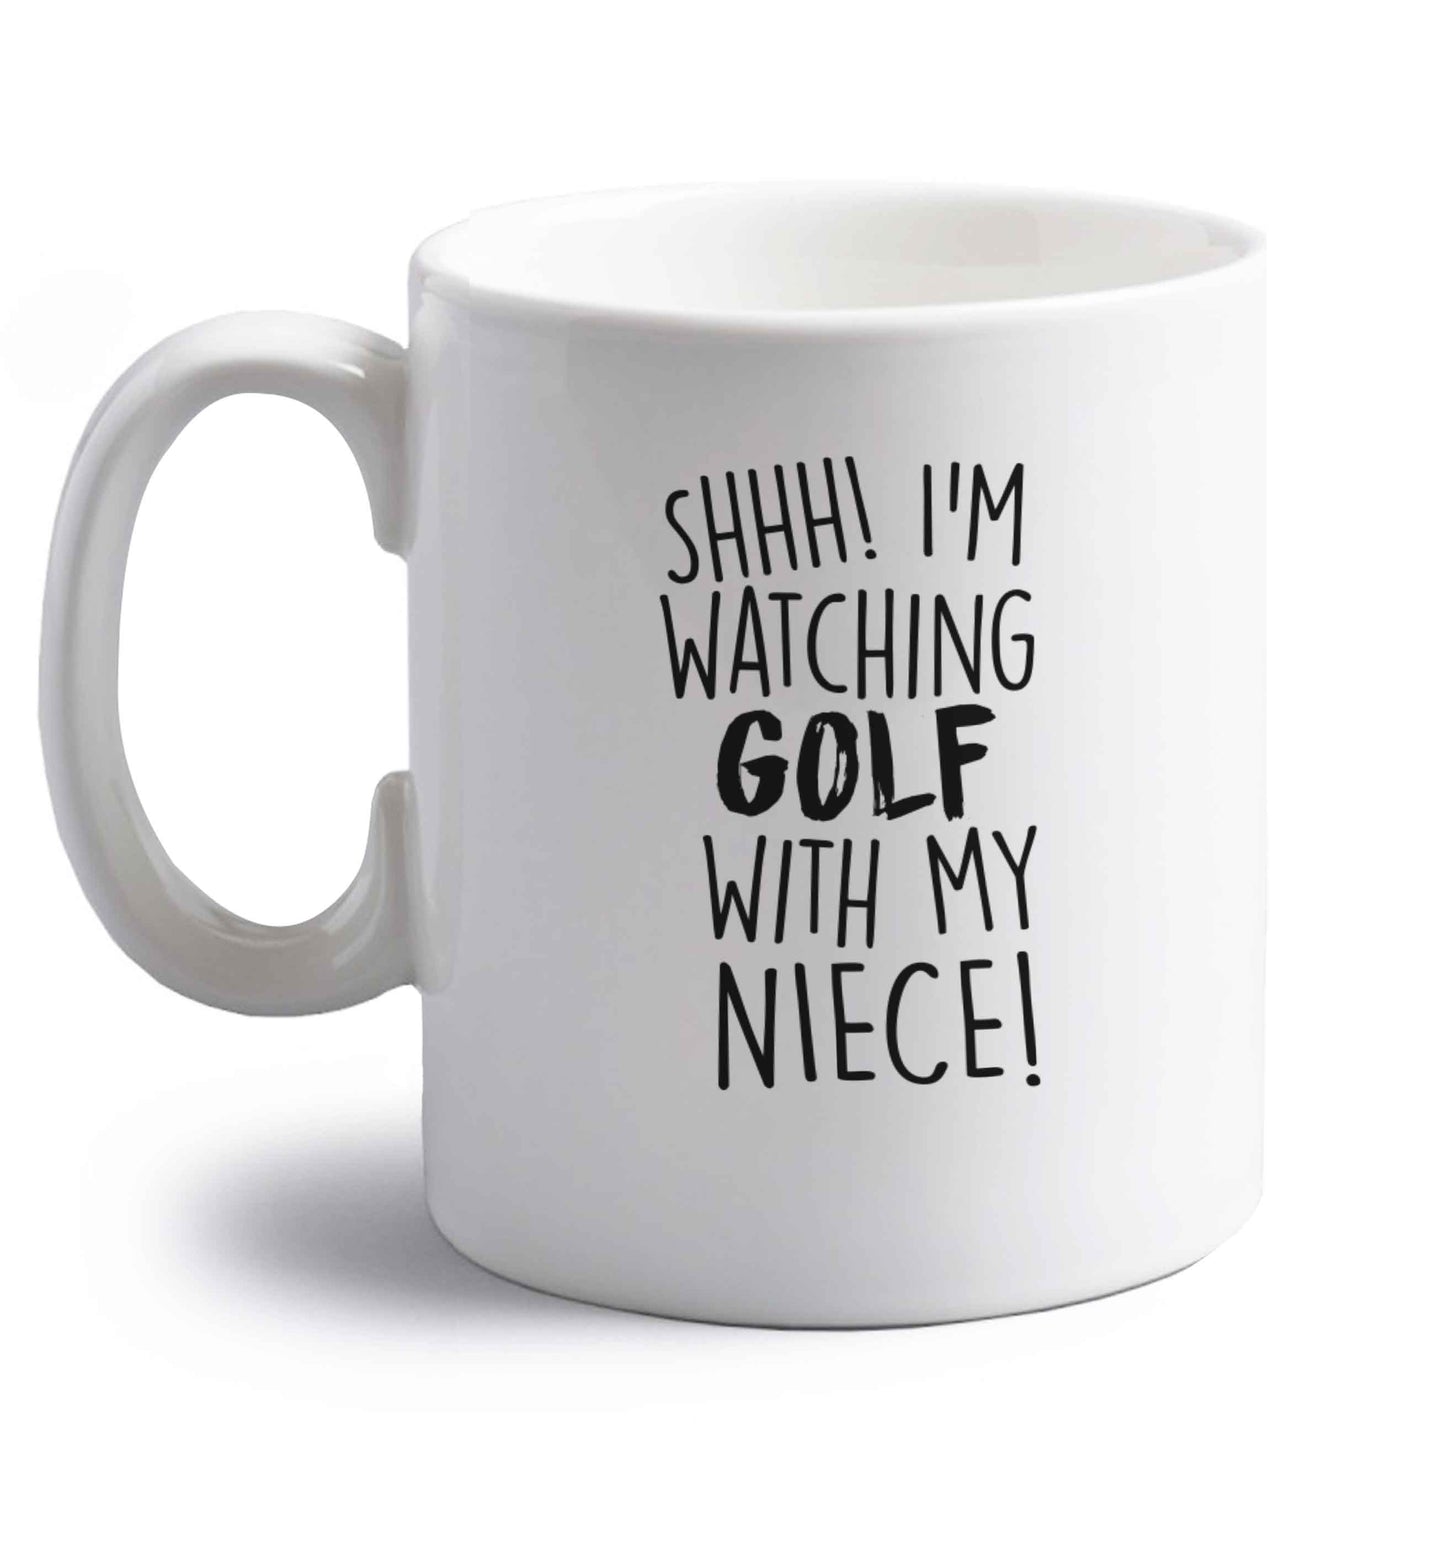 Shh I'm watching golf with my niece right handed white ceramic mug 